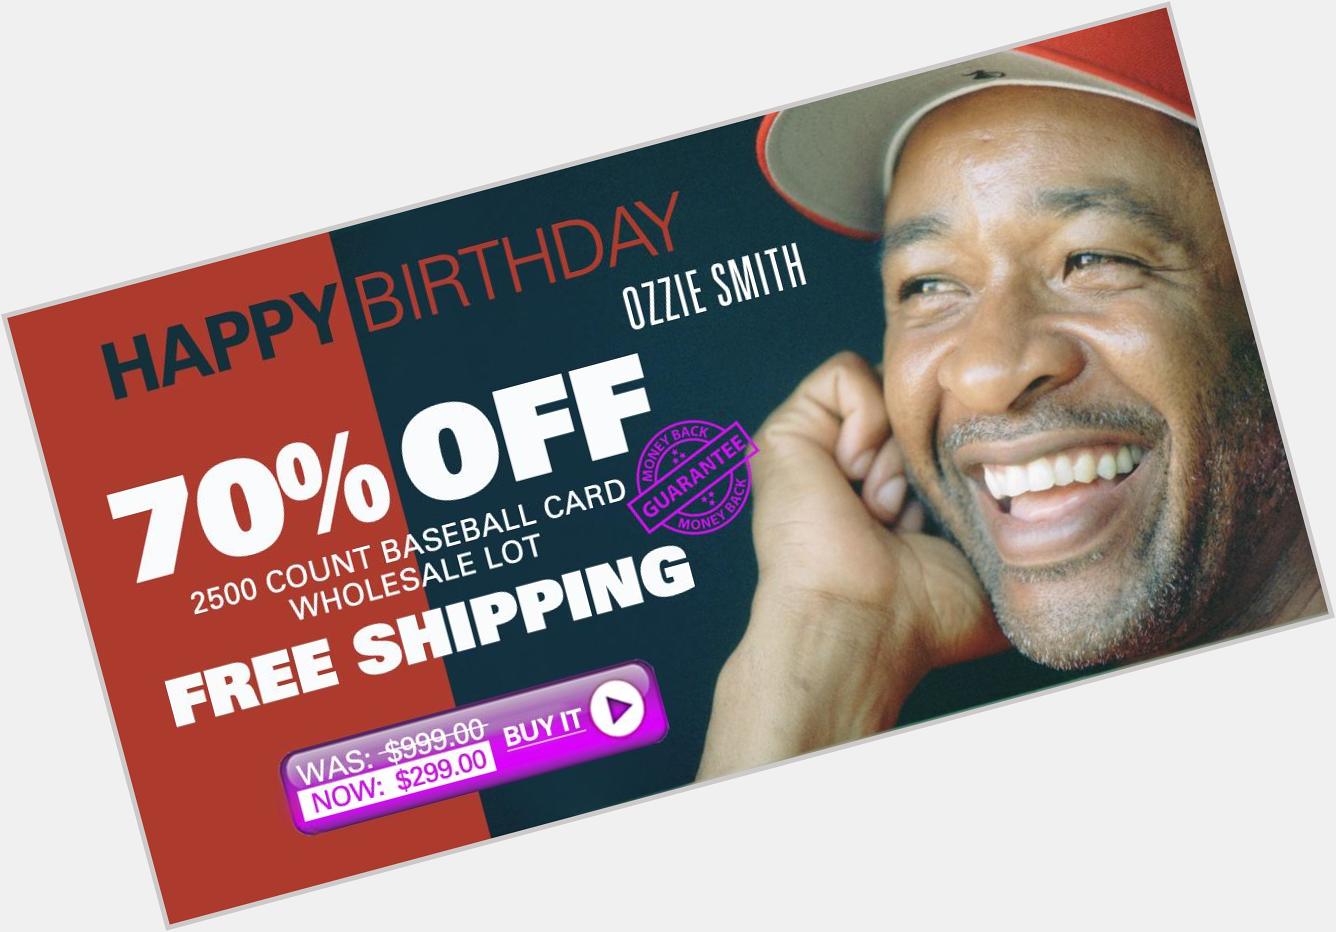 HAPPY BDAY TO OZZIE SMITH! 70% OFF A 2500 COUNT BASEBALL CARD COLLECTION! 3 DAYS! BUY NOW:  